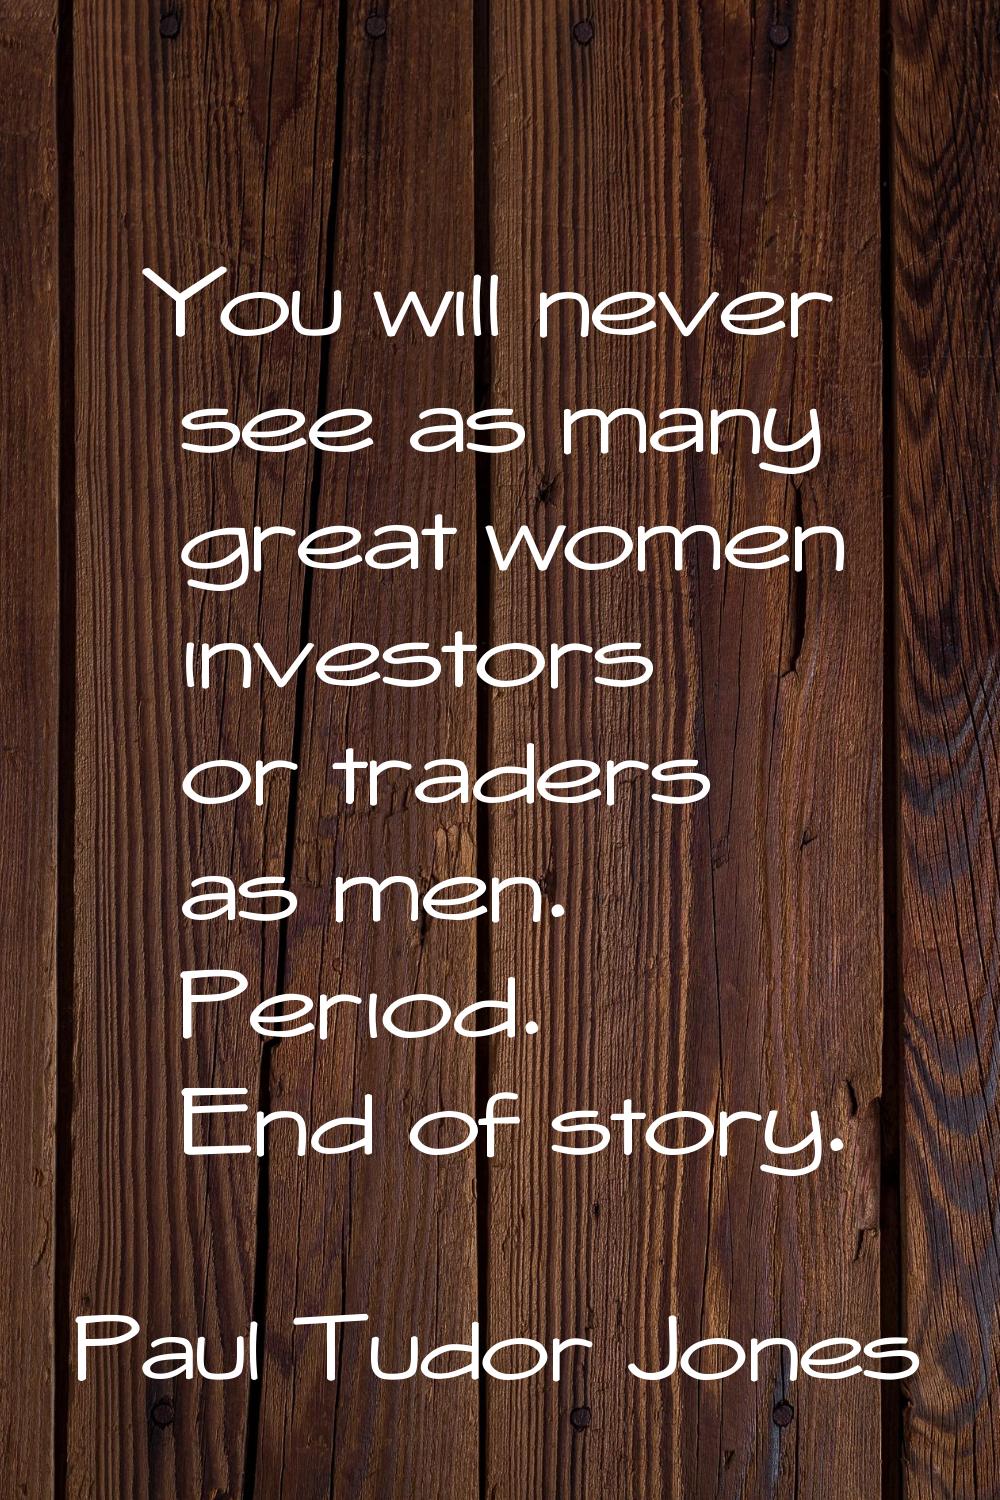 You will never see as many great women investors or traders as men. Period. End of story.